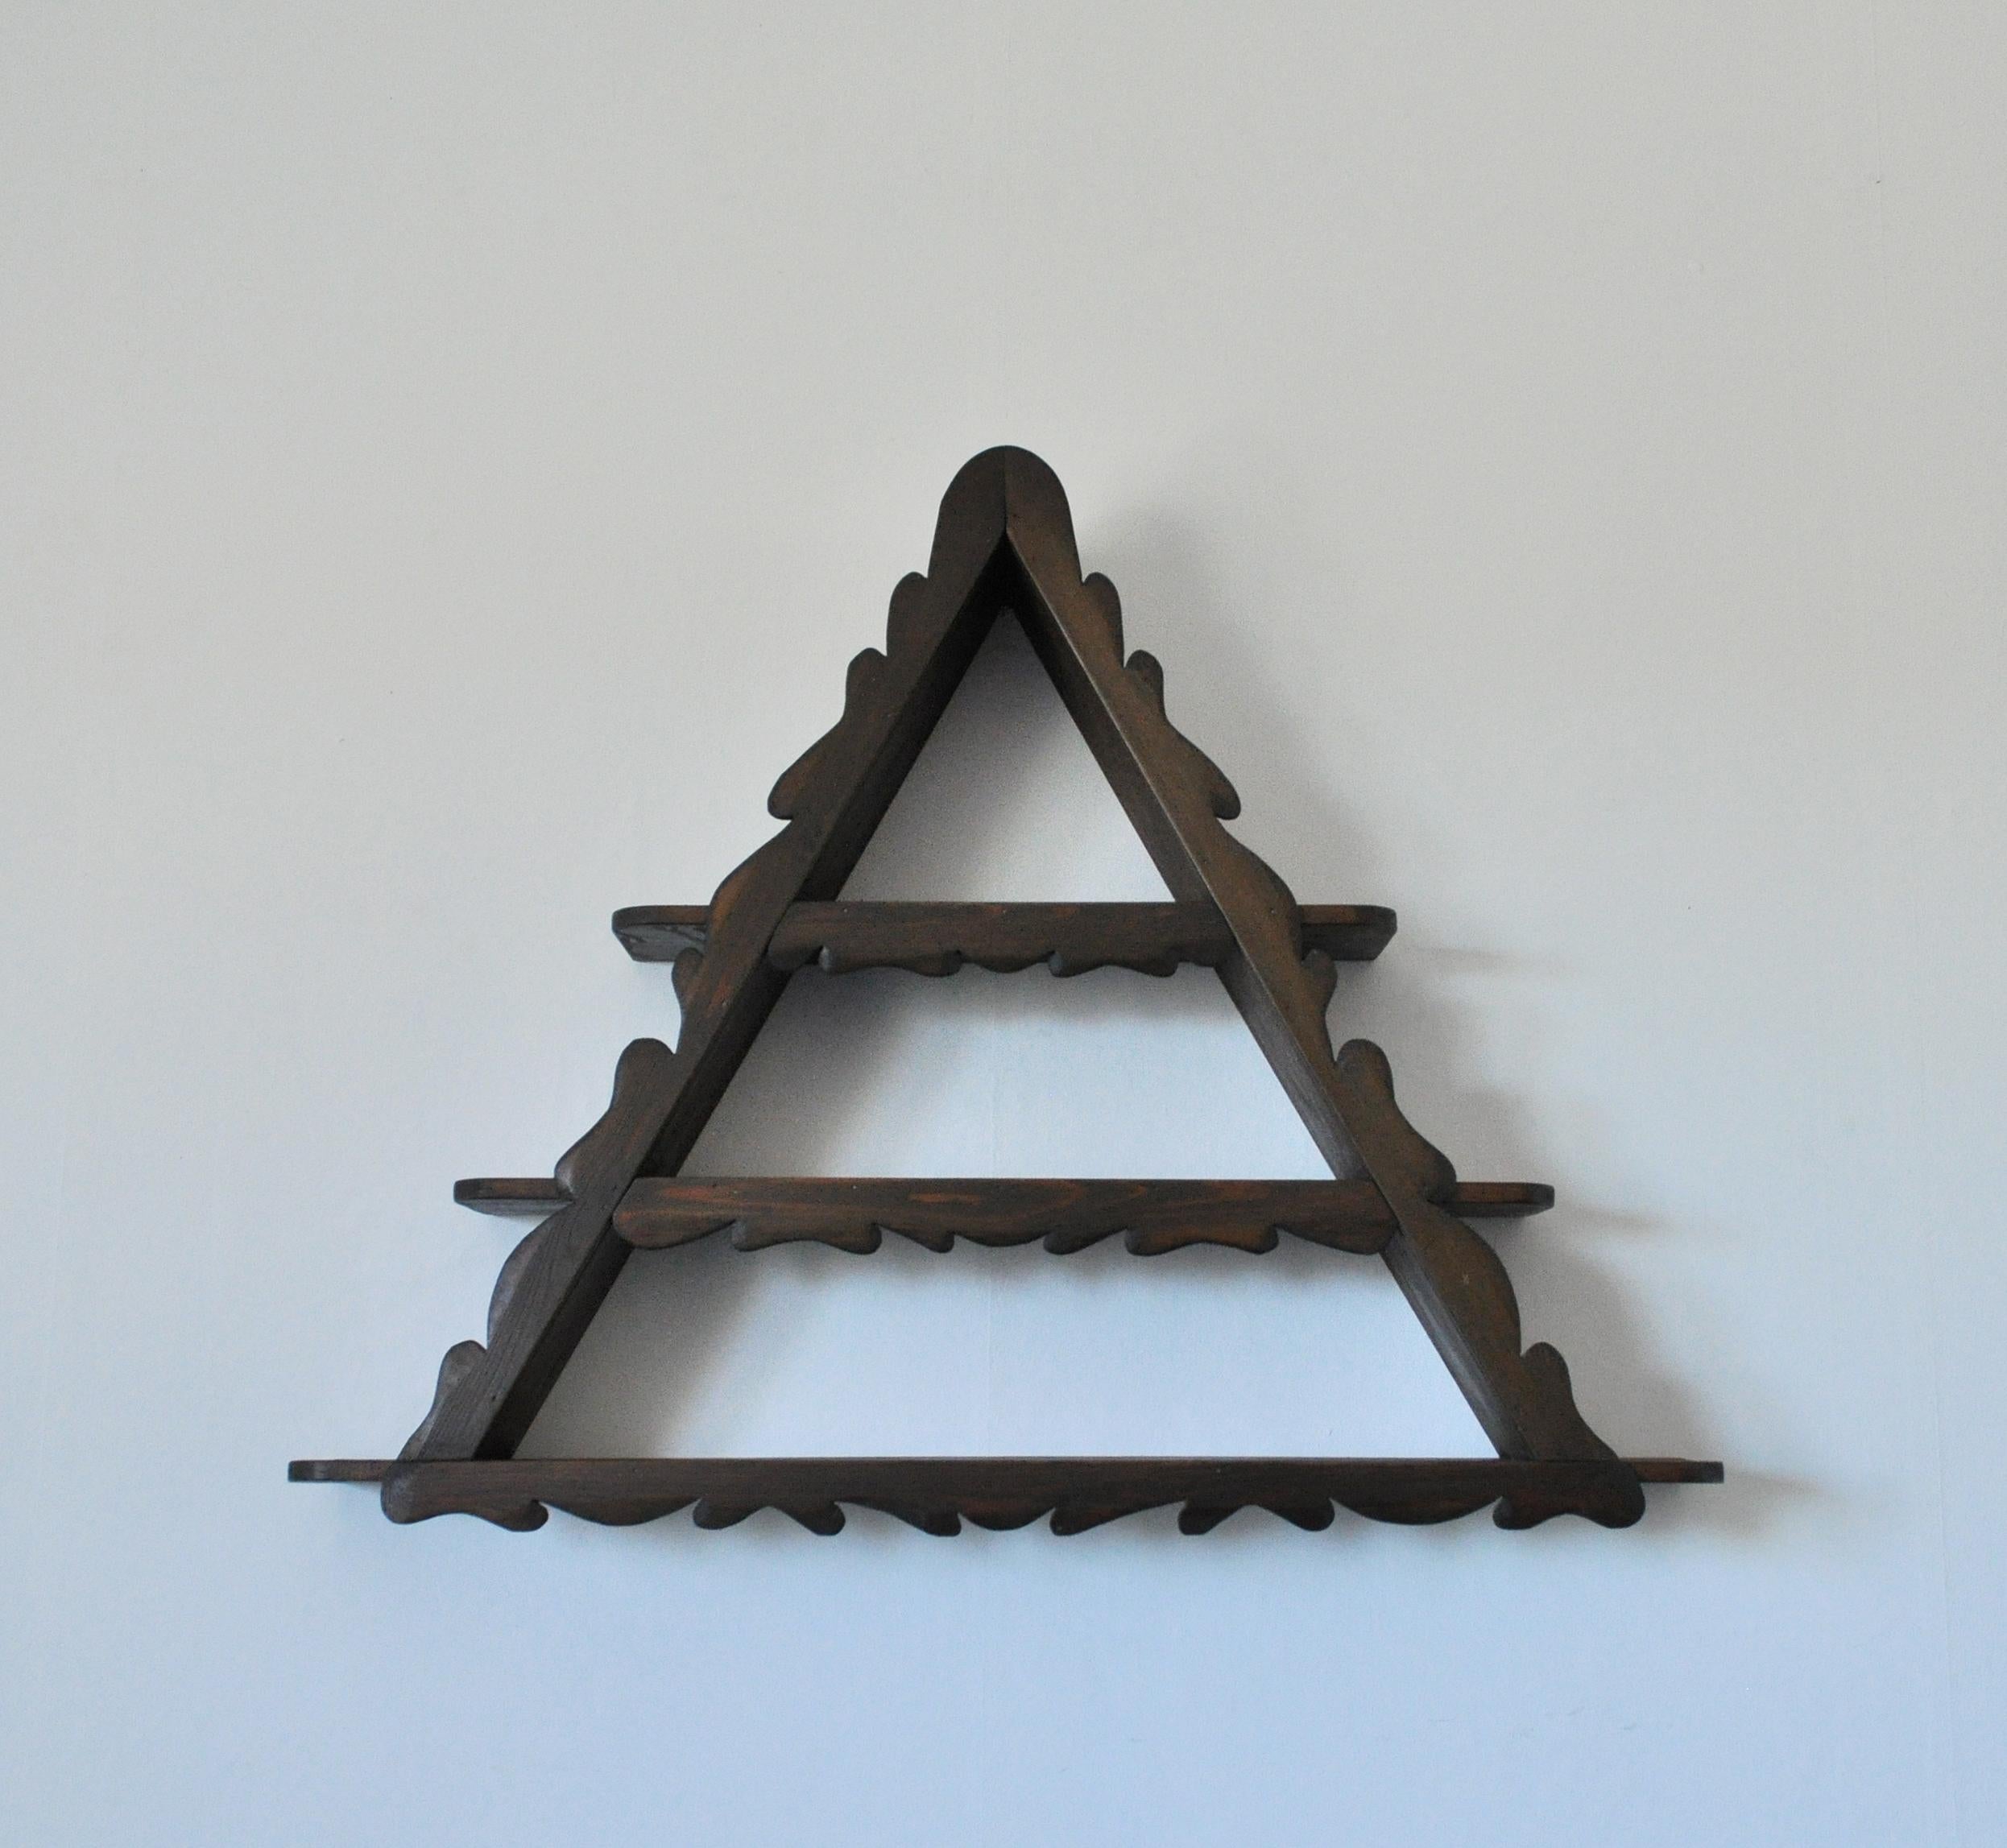 Folk Art pyramid wall shelf in stained pine wood. Handcrafted in Denmark 1960s.
Pyramid wall shelves were well-known and widespread throughout much of Europe in the 18th and 19th centuries.